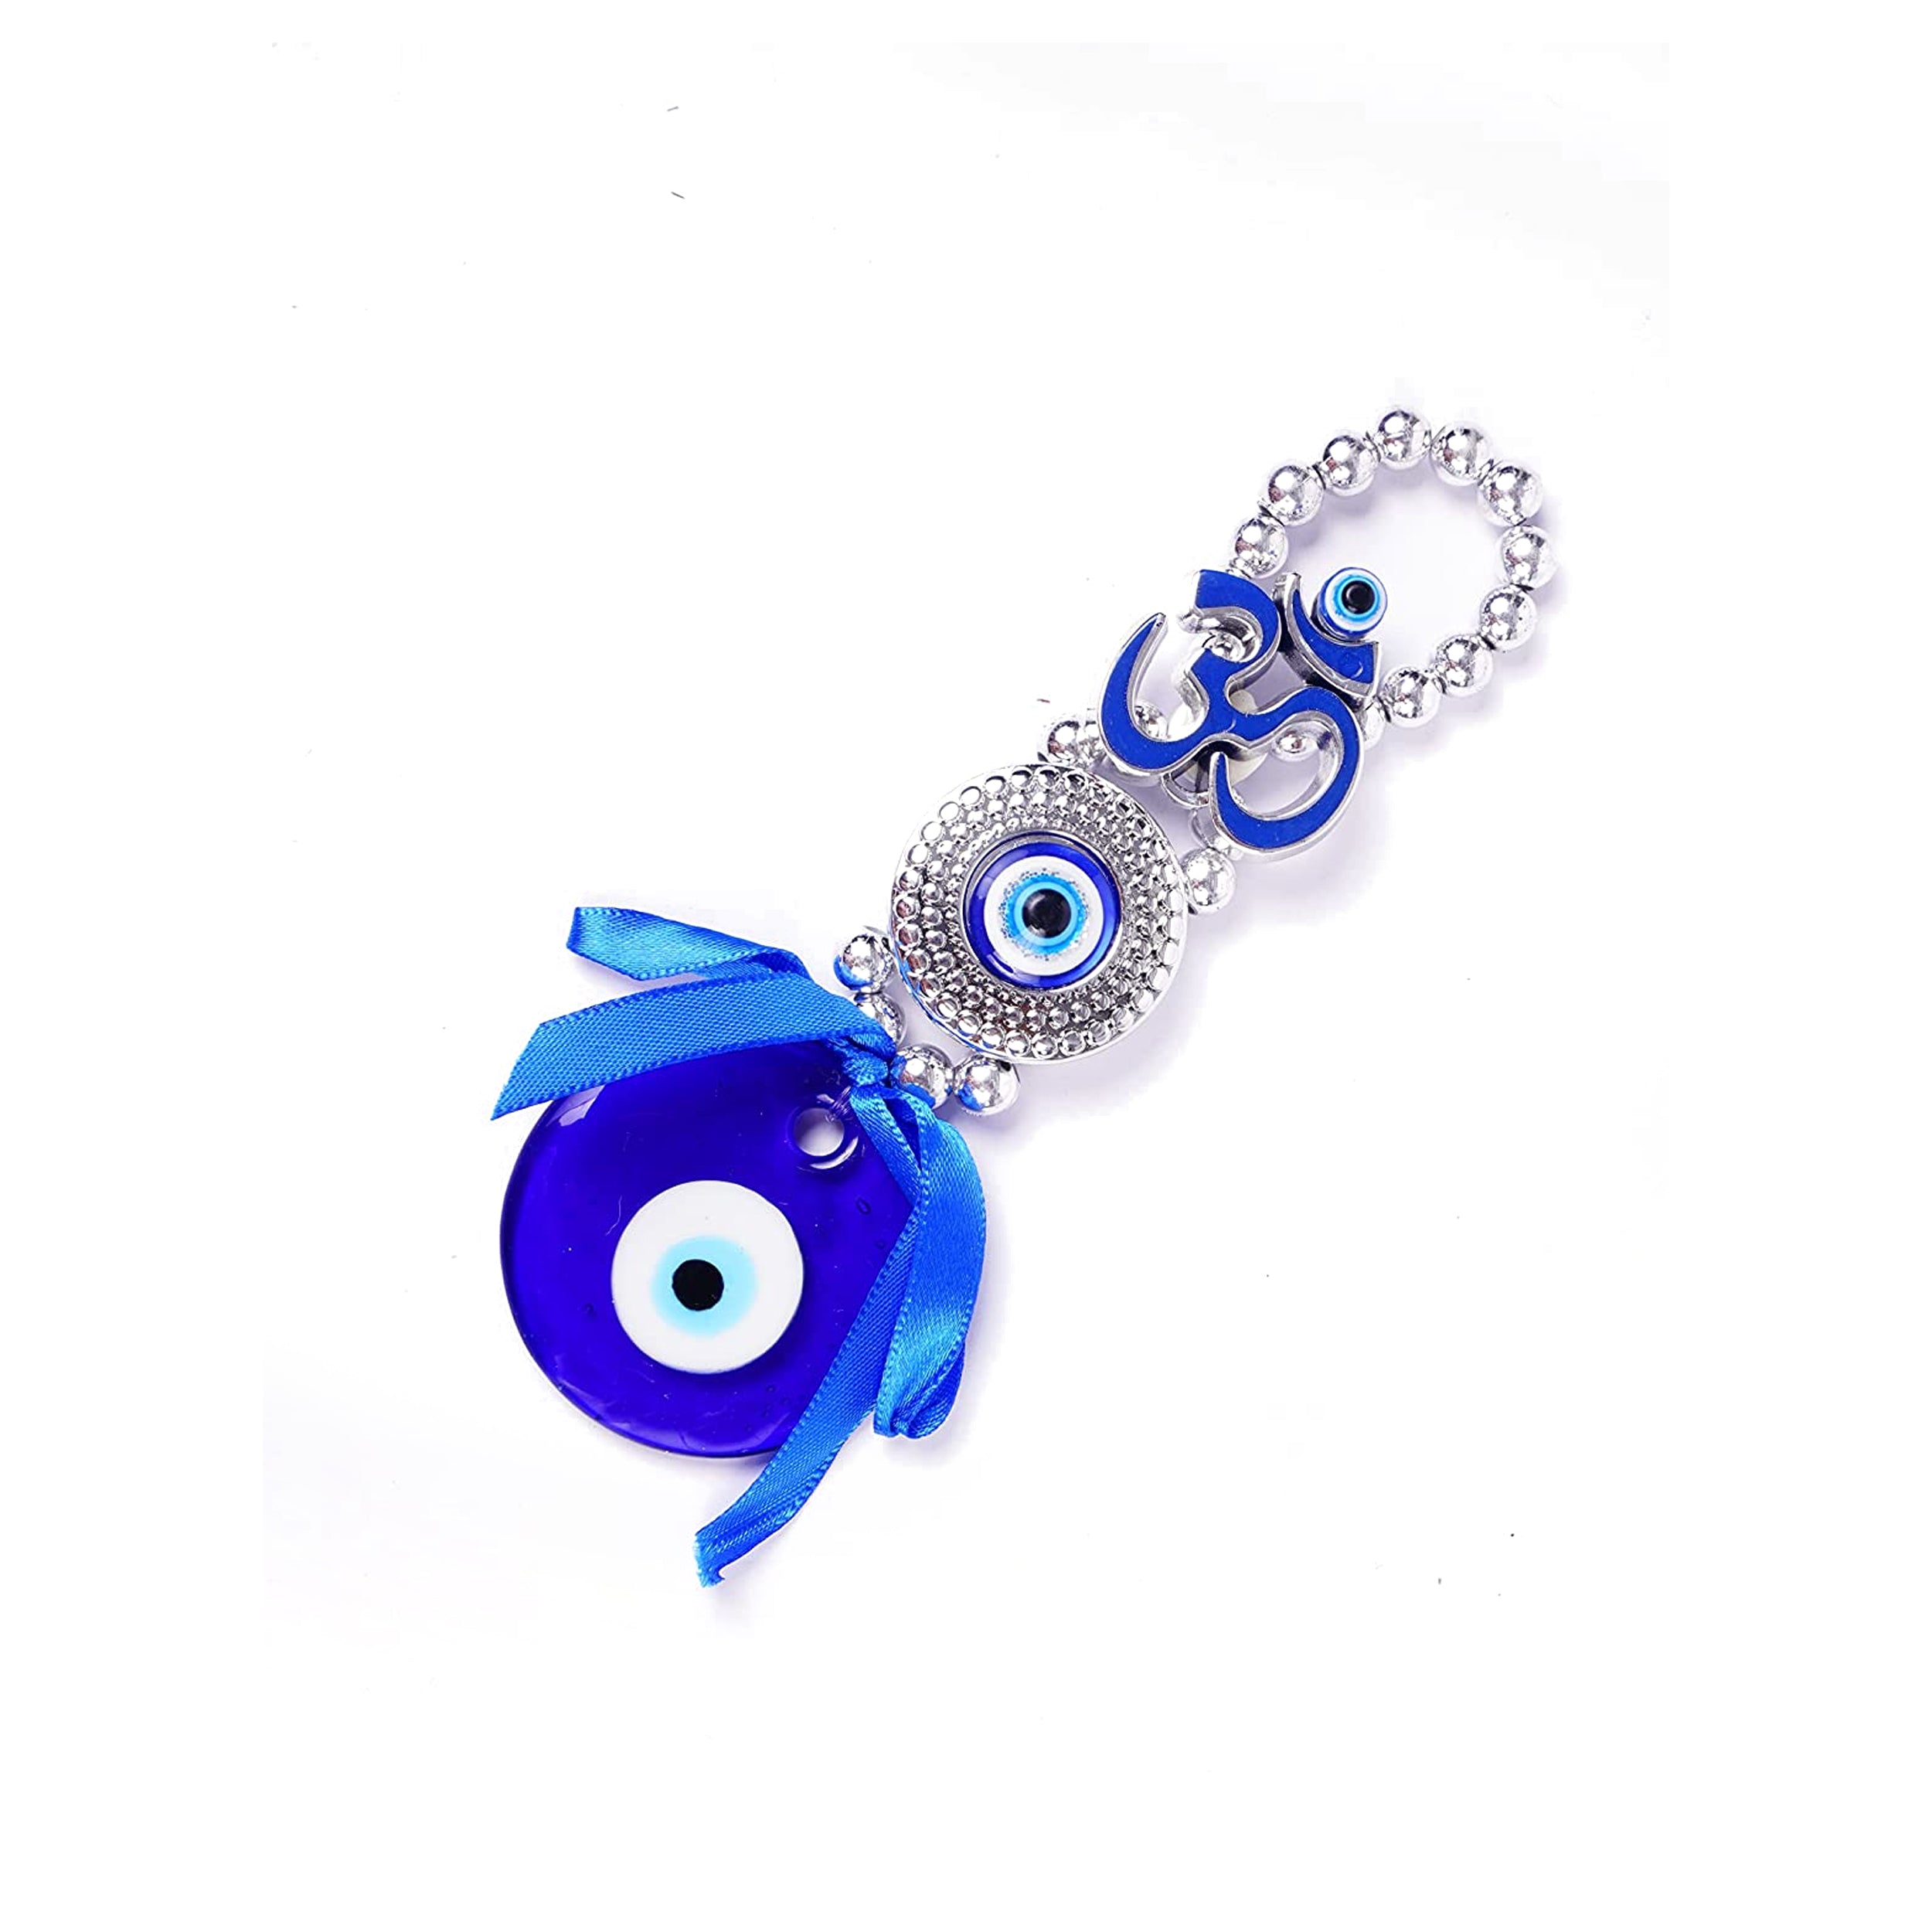 Blue Evil Eyes With OM Design With Blue Pendent Decoration Hanging Ornament For Car, Home Décor For Blessing